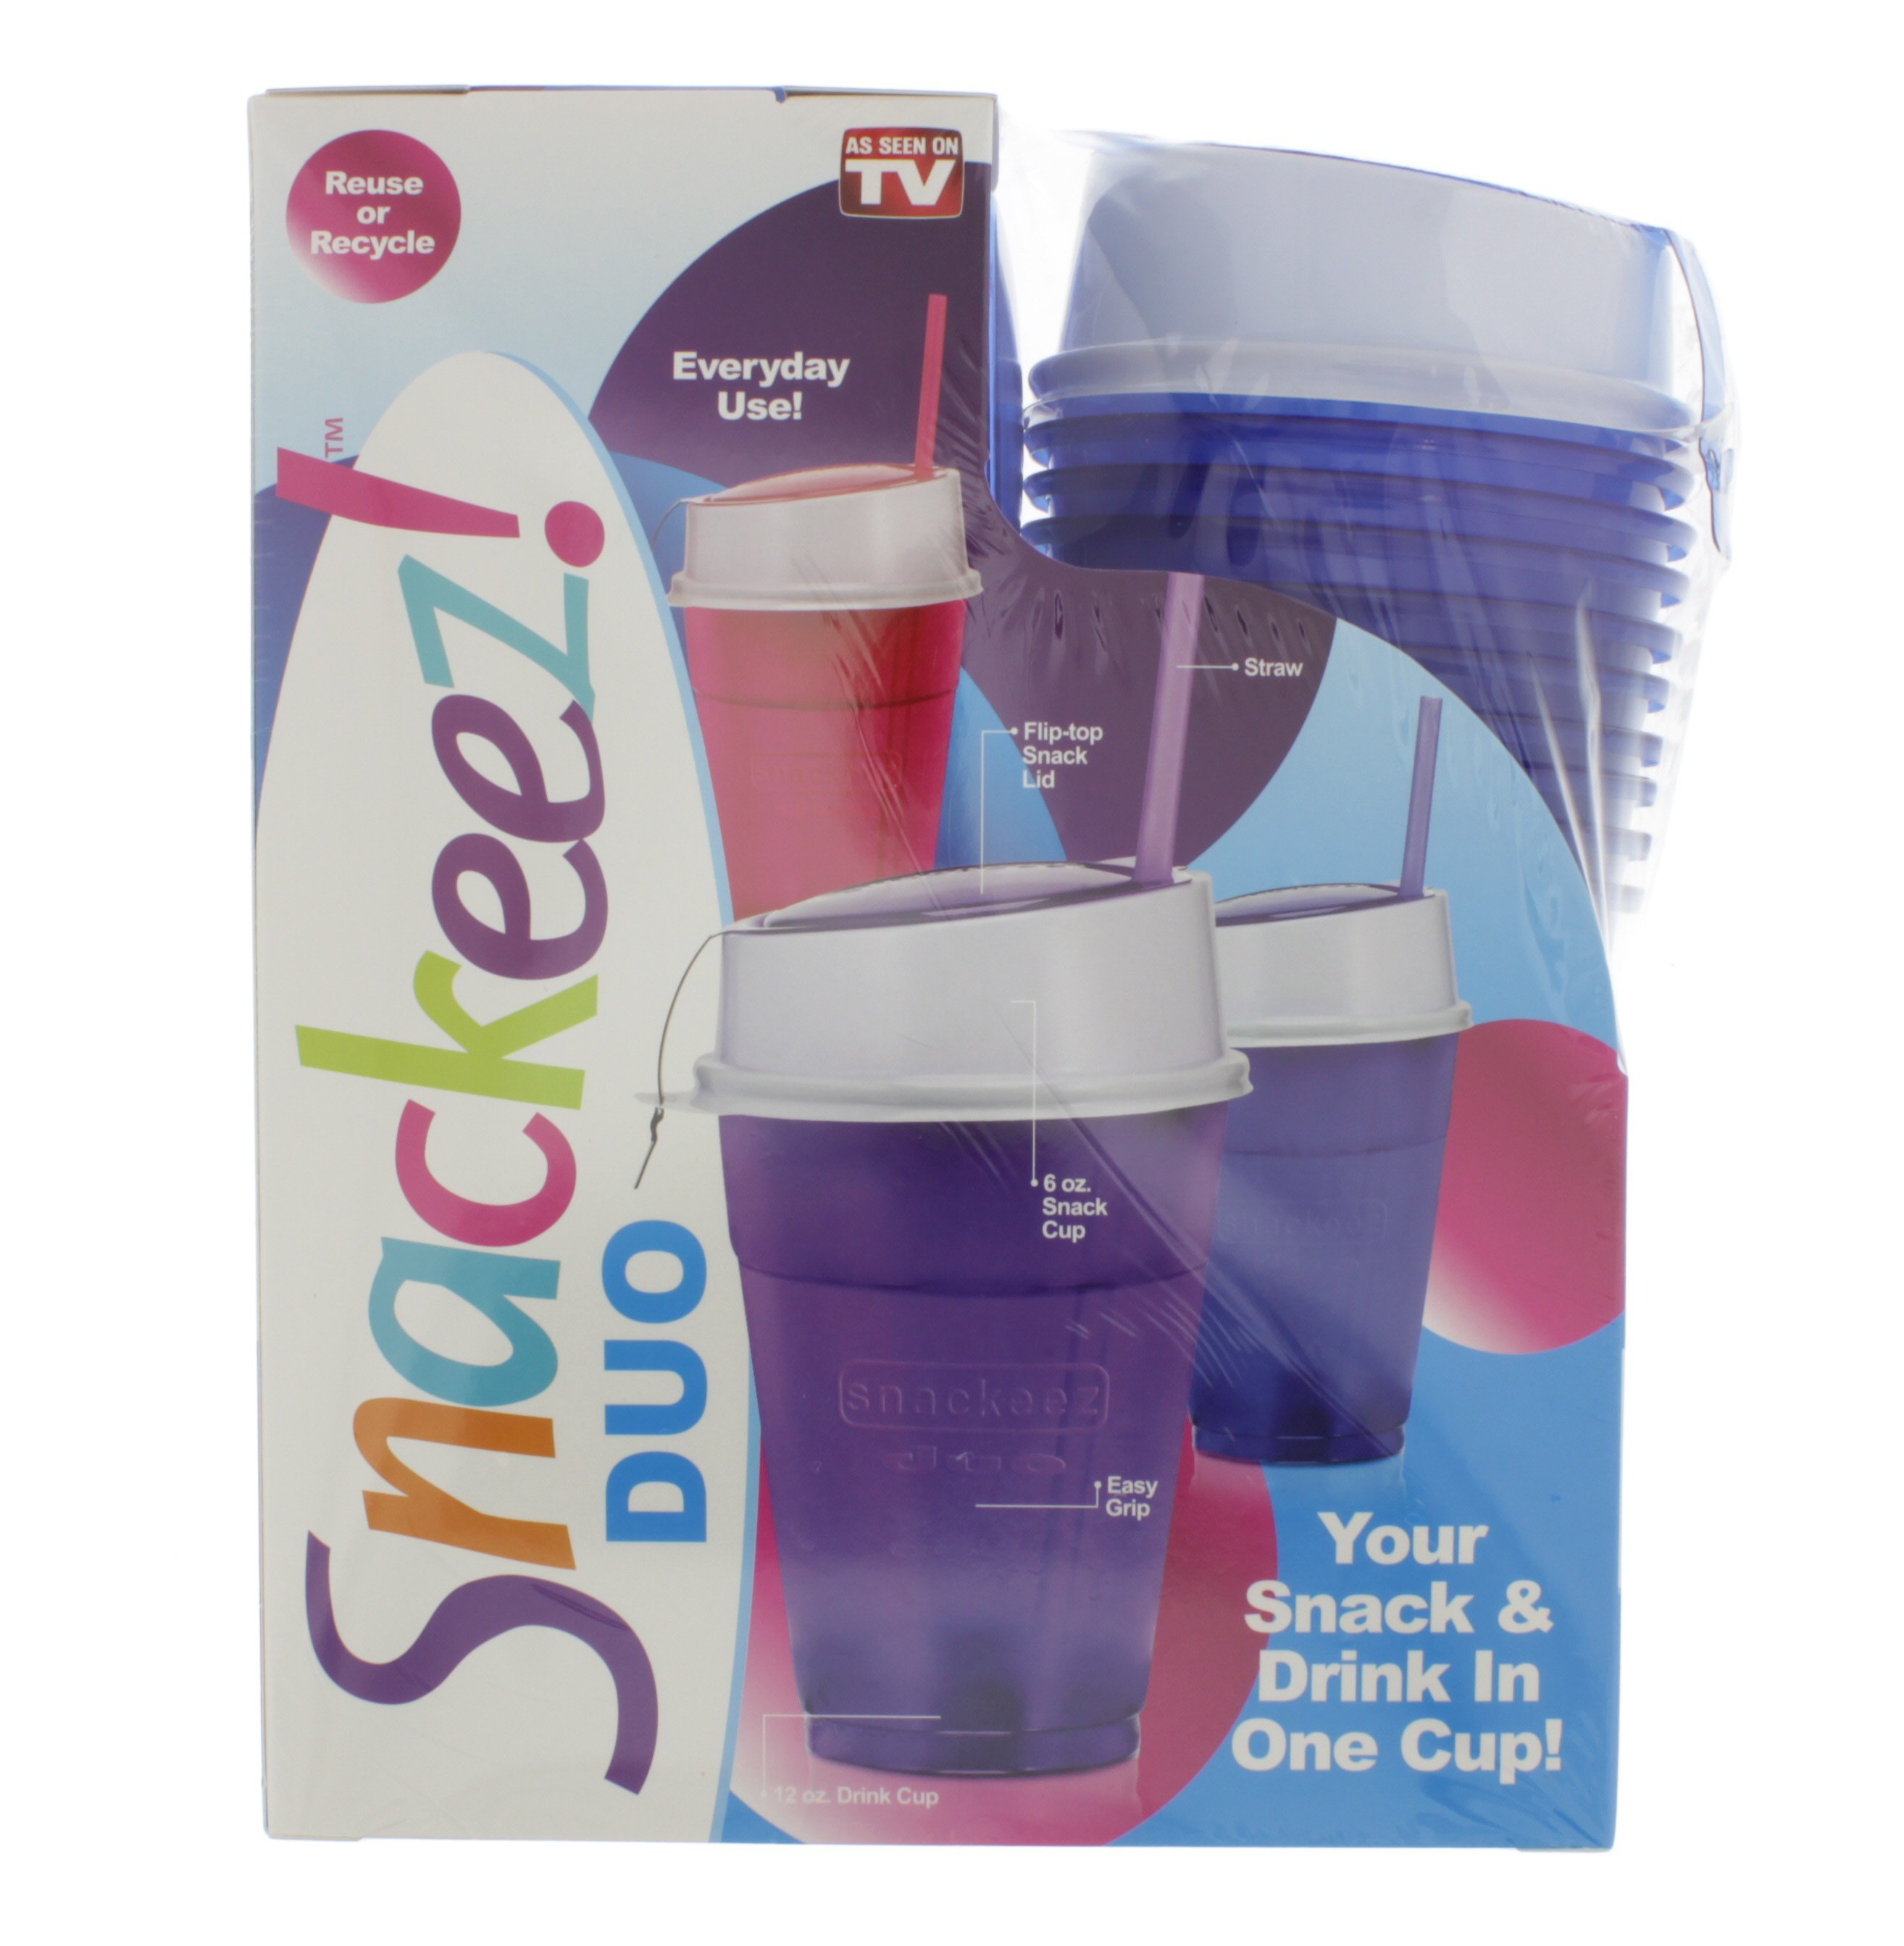 Snackeez Duo 30 Piece Plastic Snack and Drink Traveler Cup Set -  Disposable, Reusable, and Recyclable - As Seen on TV 